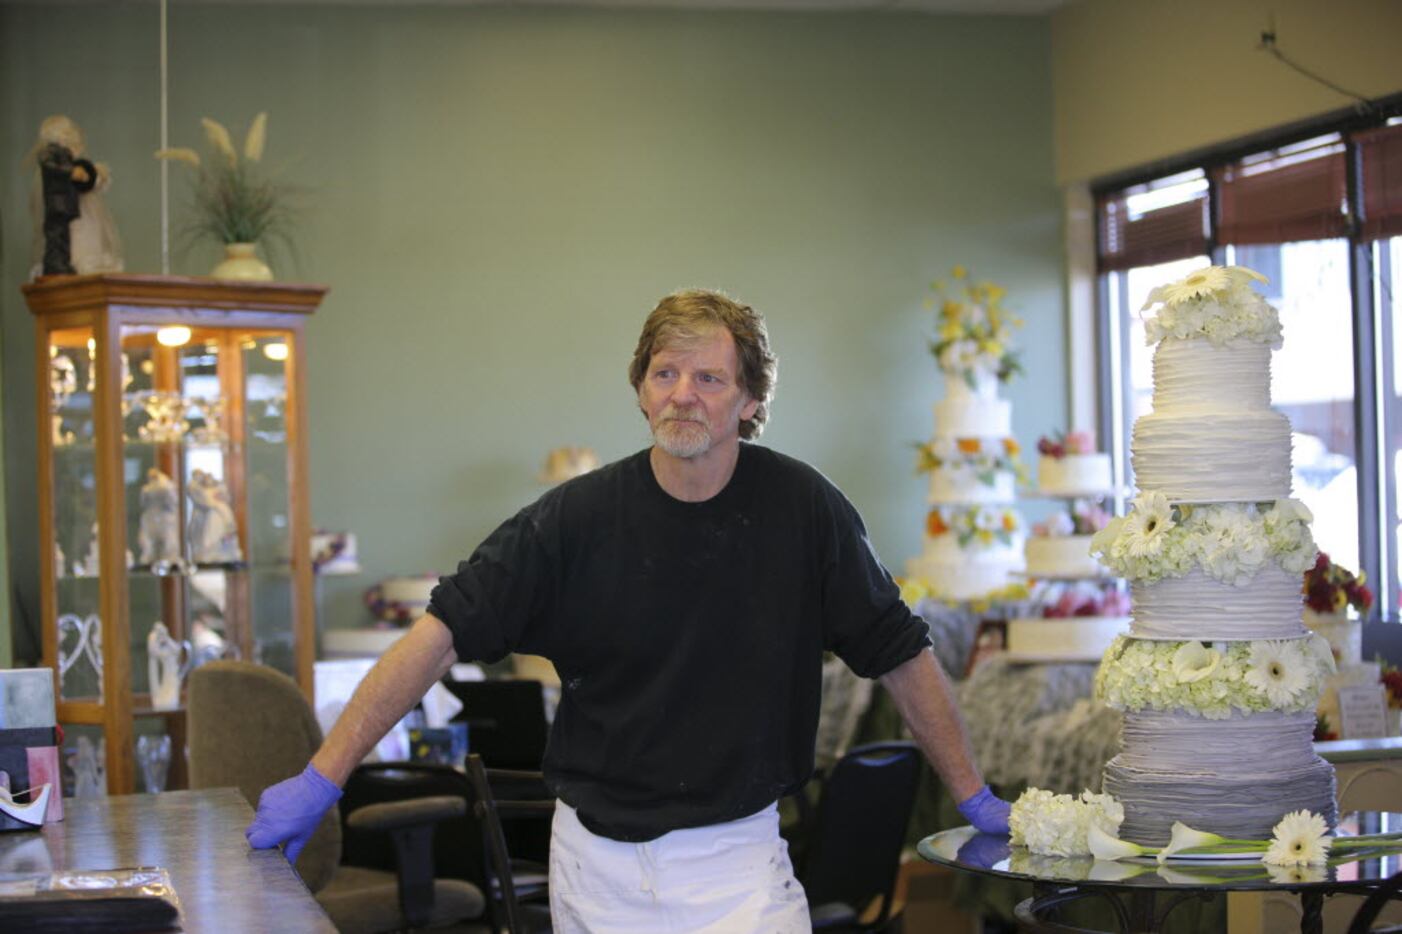 Jack Phillips at his business, Masterpiece Cakeshop, in Lakewood, Colo., in 2014. Phillips'...